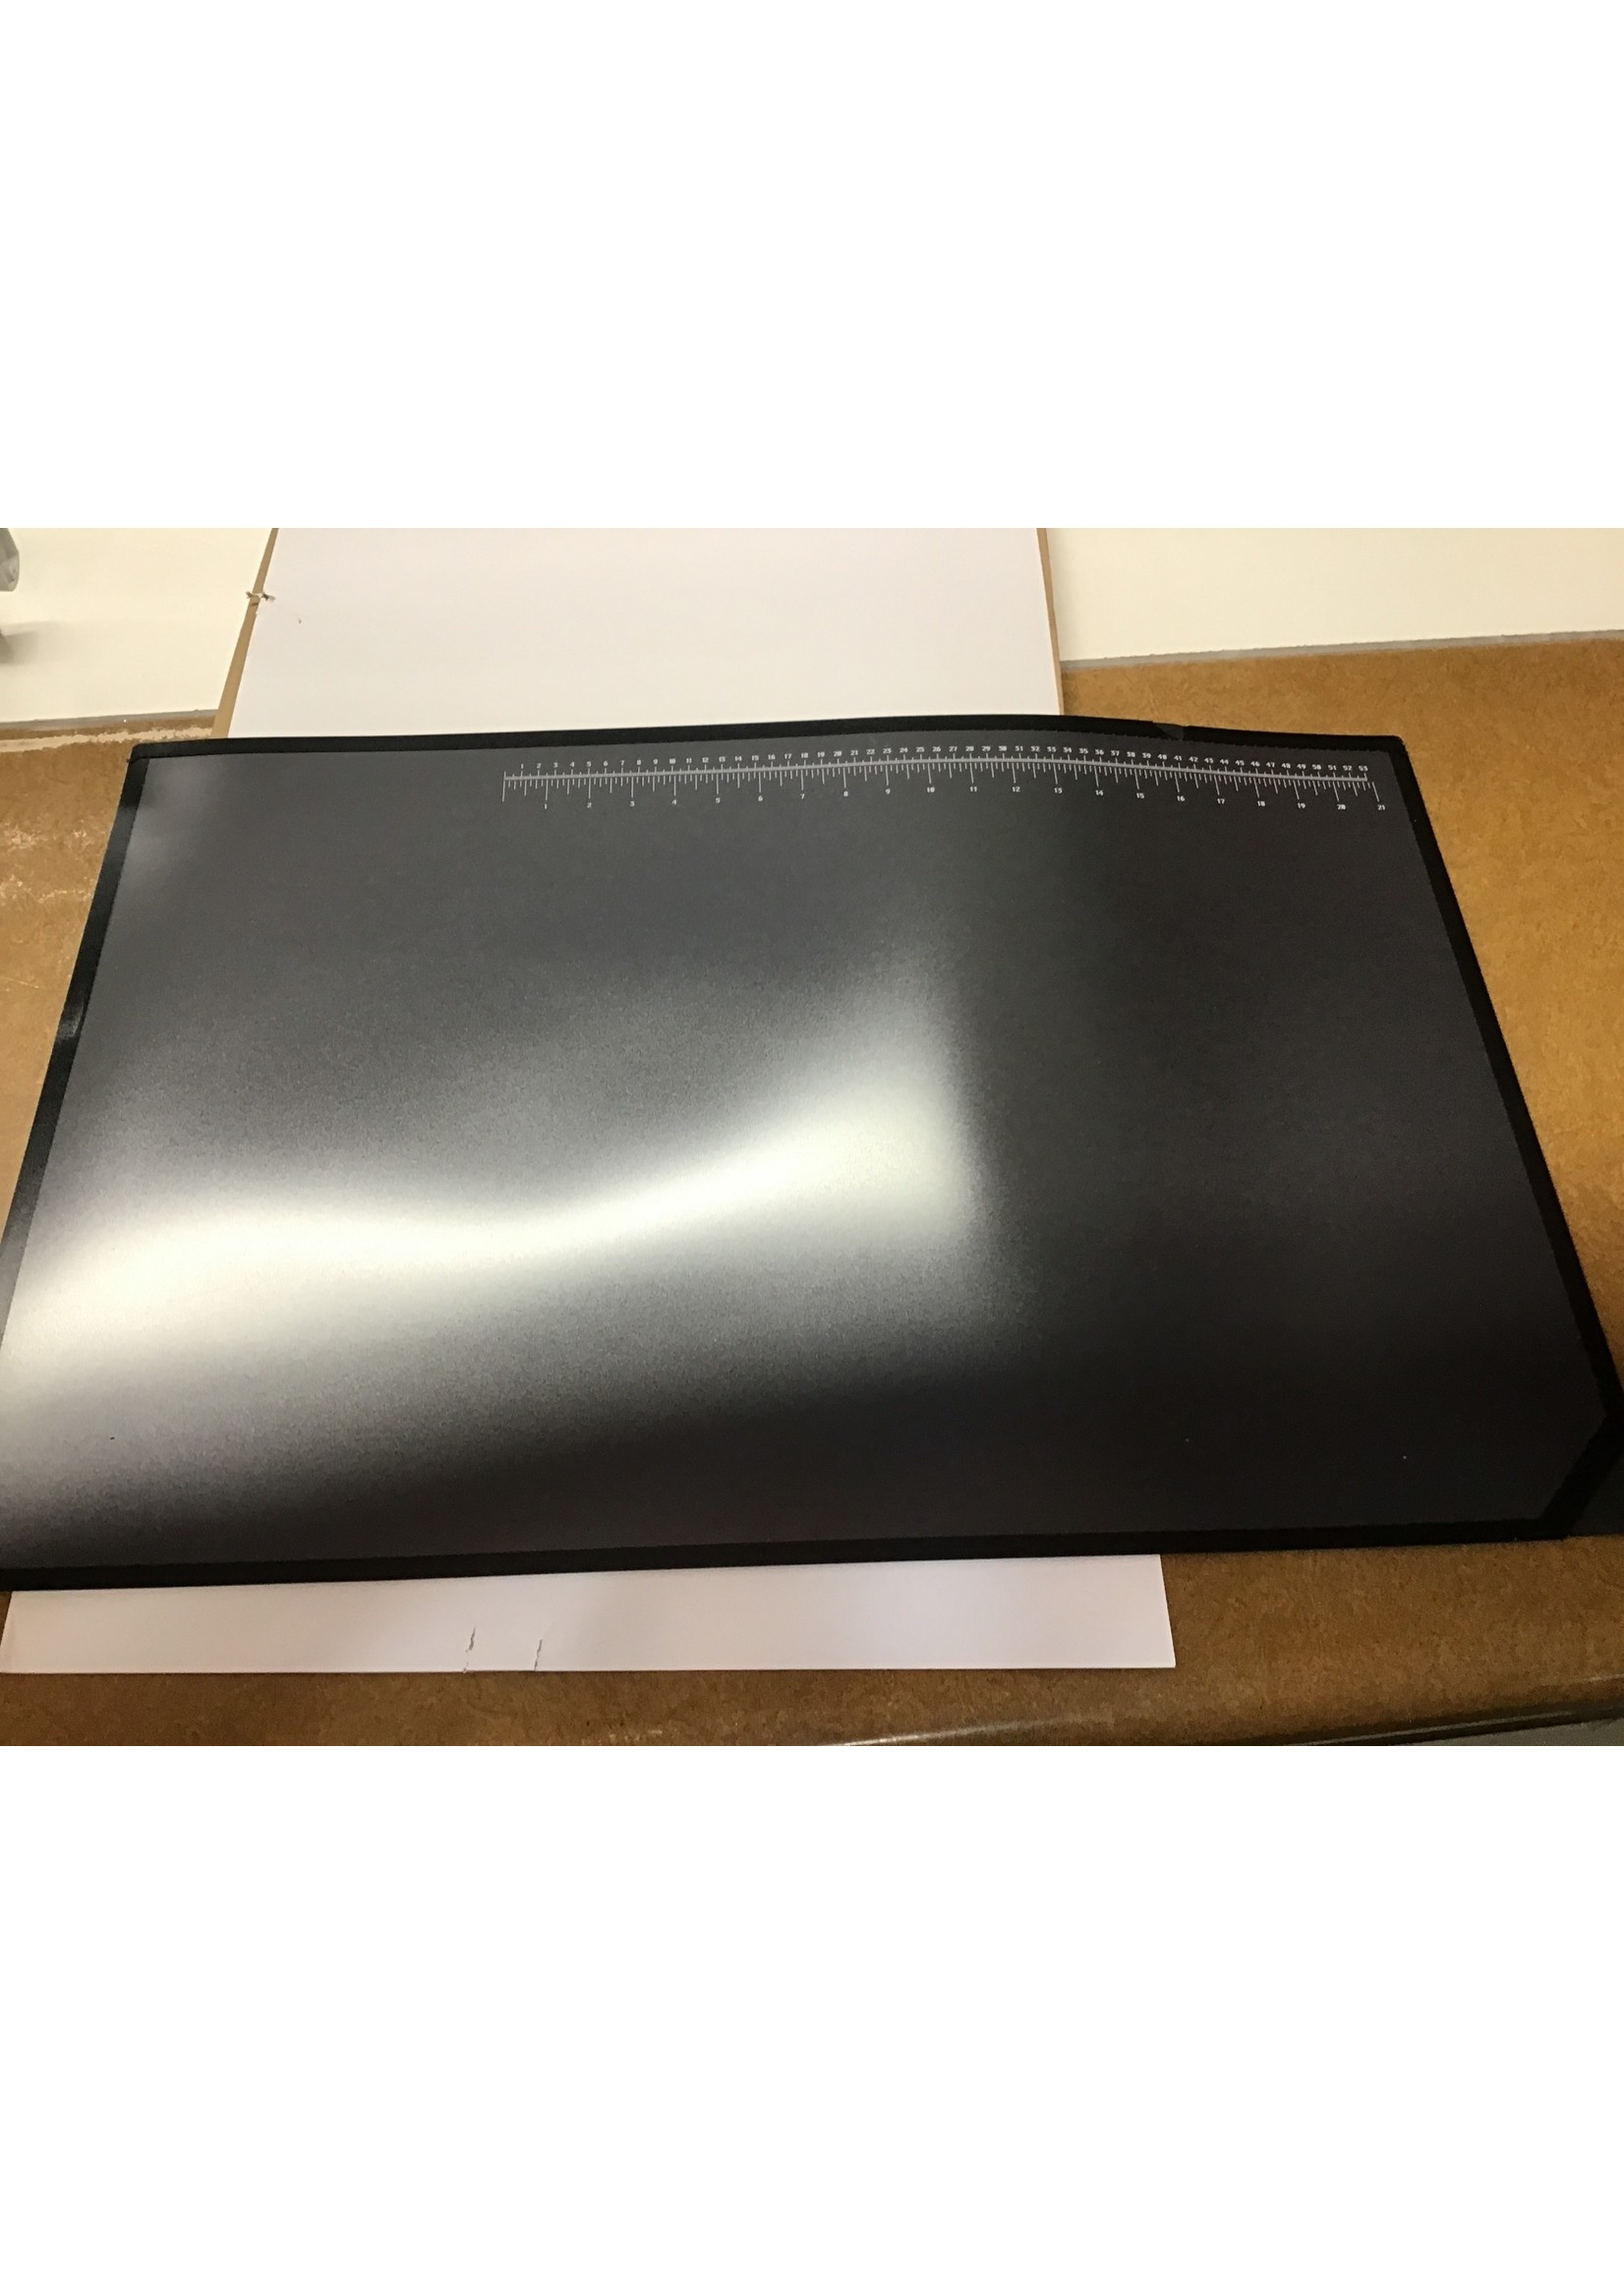 Artistic Office Products 20" x 31" Logo Pad Lift-top Desktop Organizer Desk Mat, Black/Clear w/ ruler* top is chipped